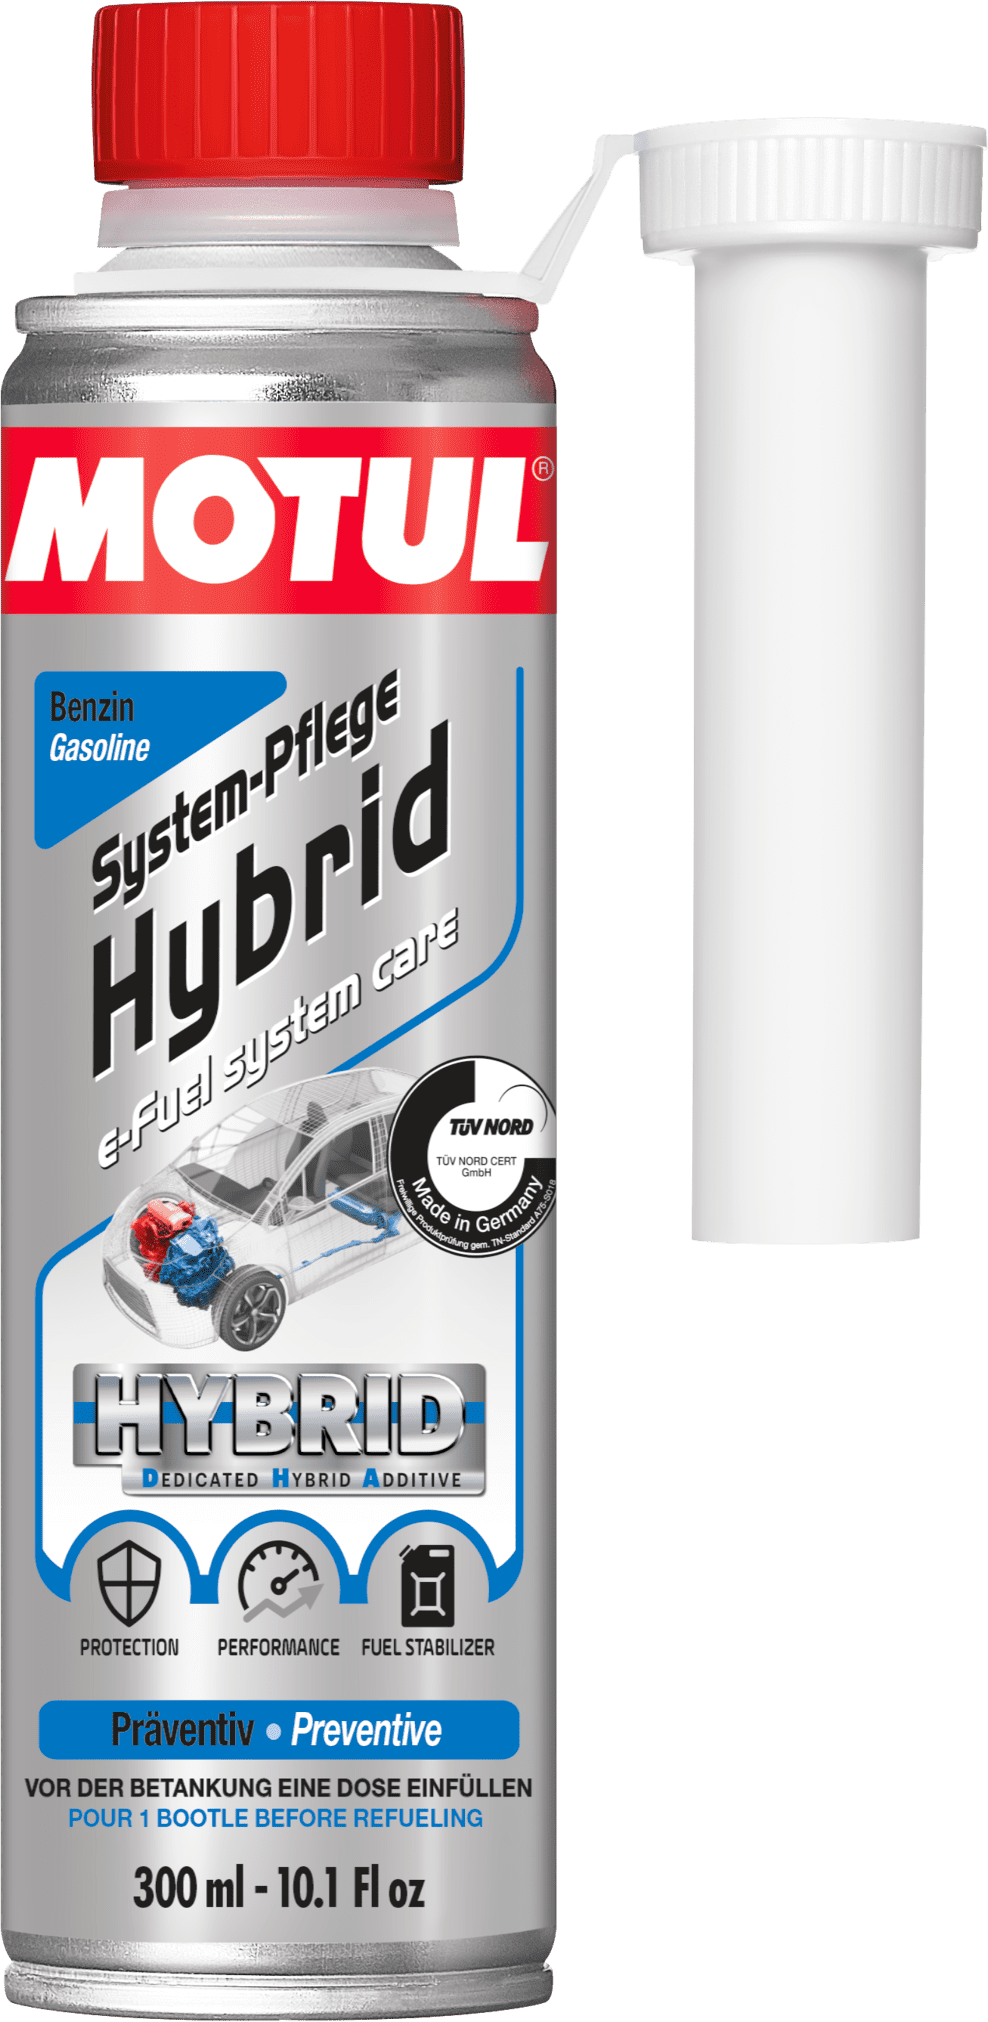 110886-300ML MOTUL® e-FUEL SYSTEM CARE is a DHA - Dedicated Hybrid Additive, specifically formulated for use in hybrid electric/gasoline vehicles.